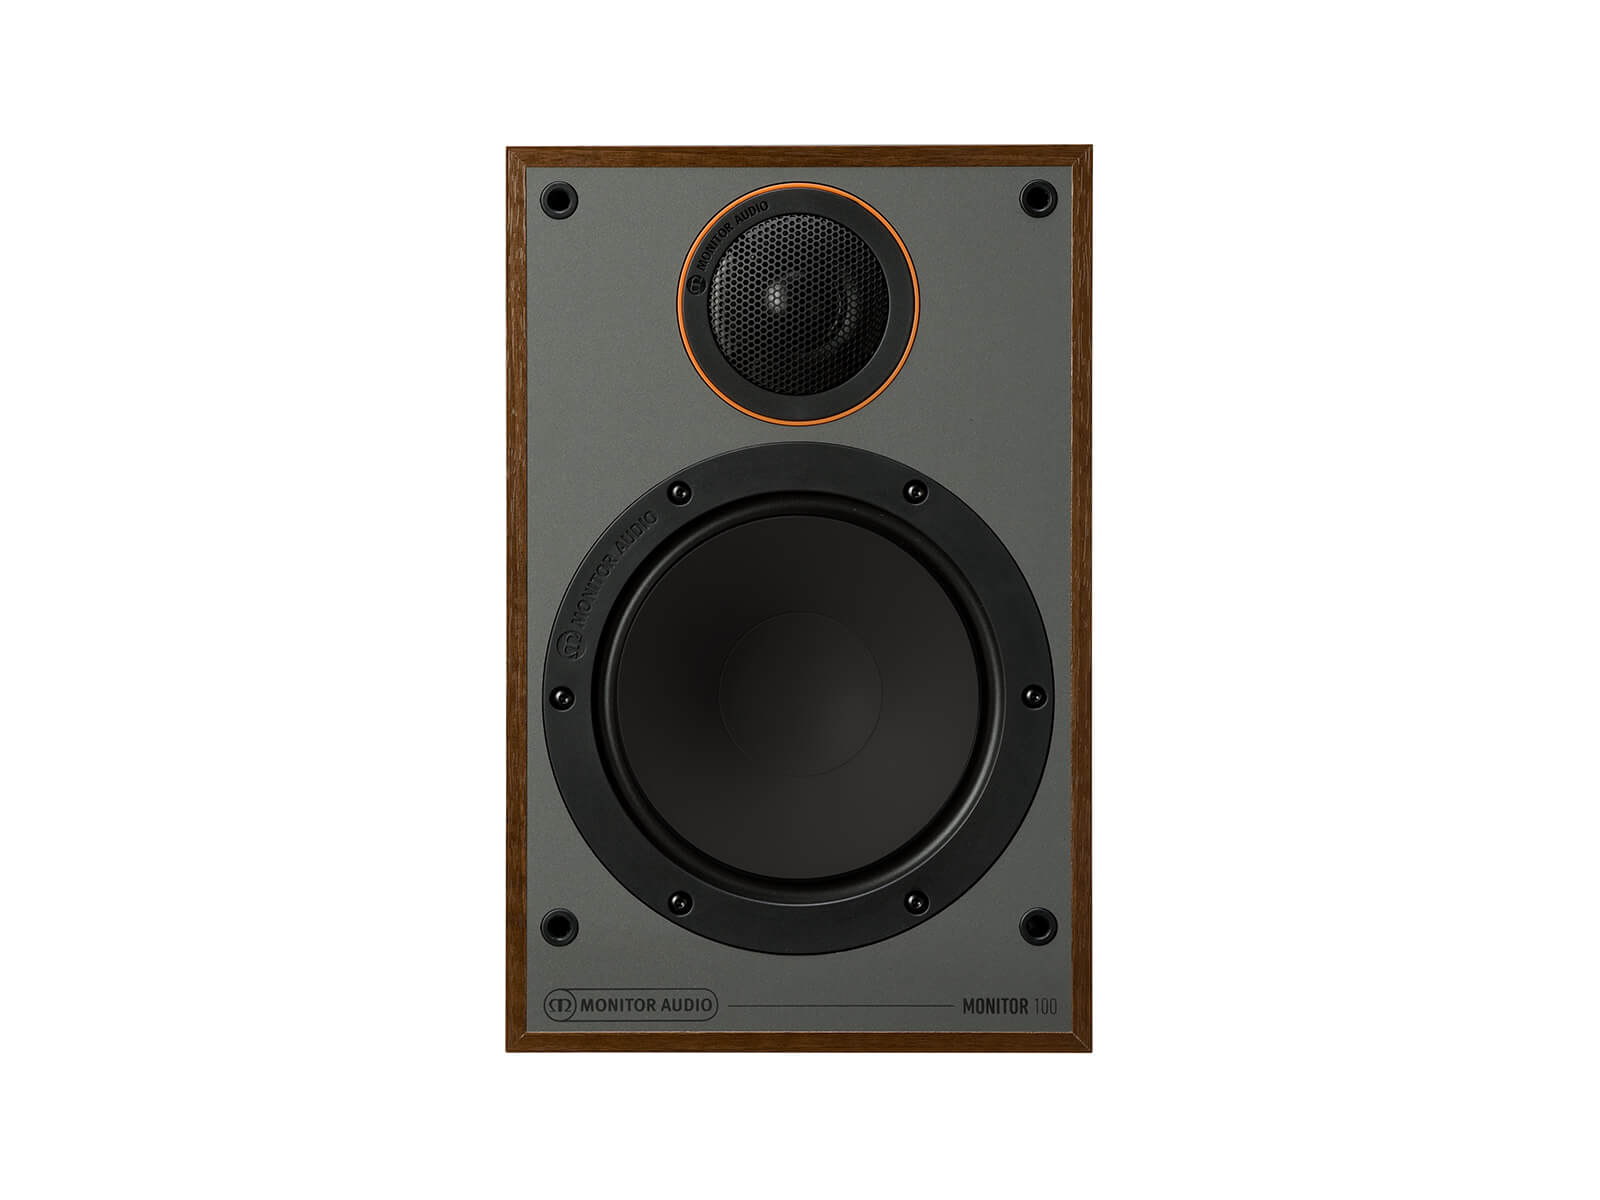 Monitor 100, bookshelf speakers, without grille, front on in a walnut vinyl finish.